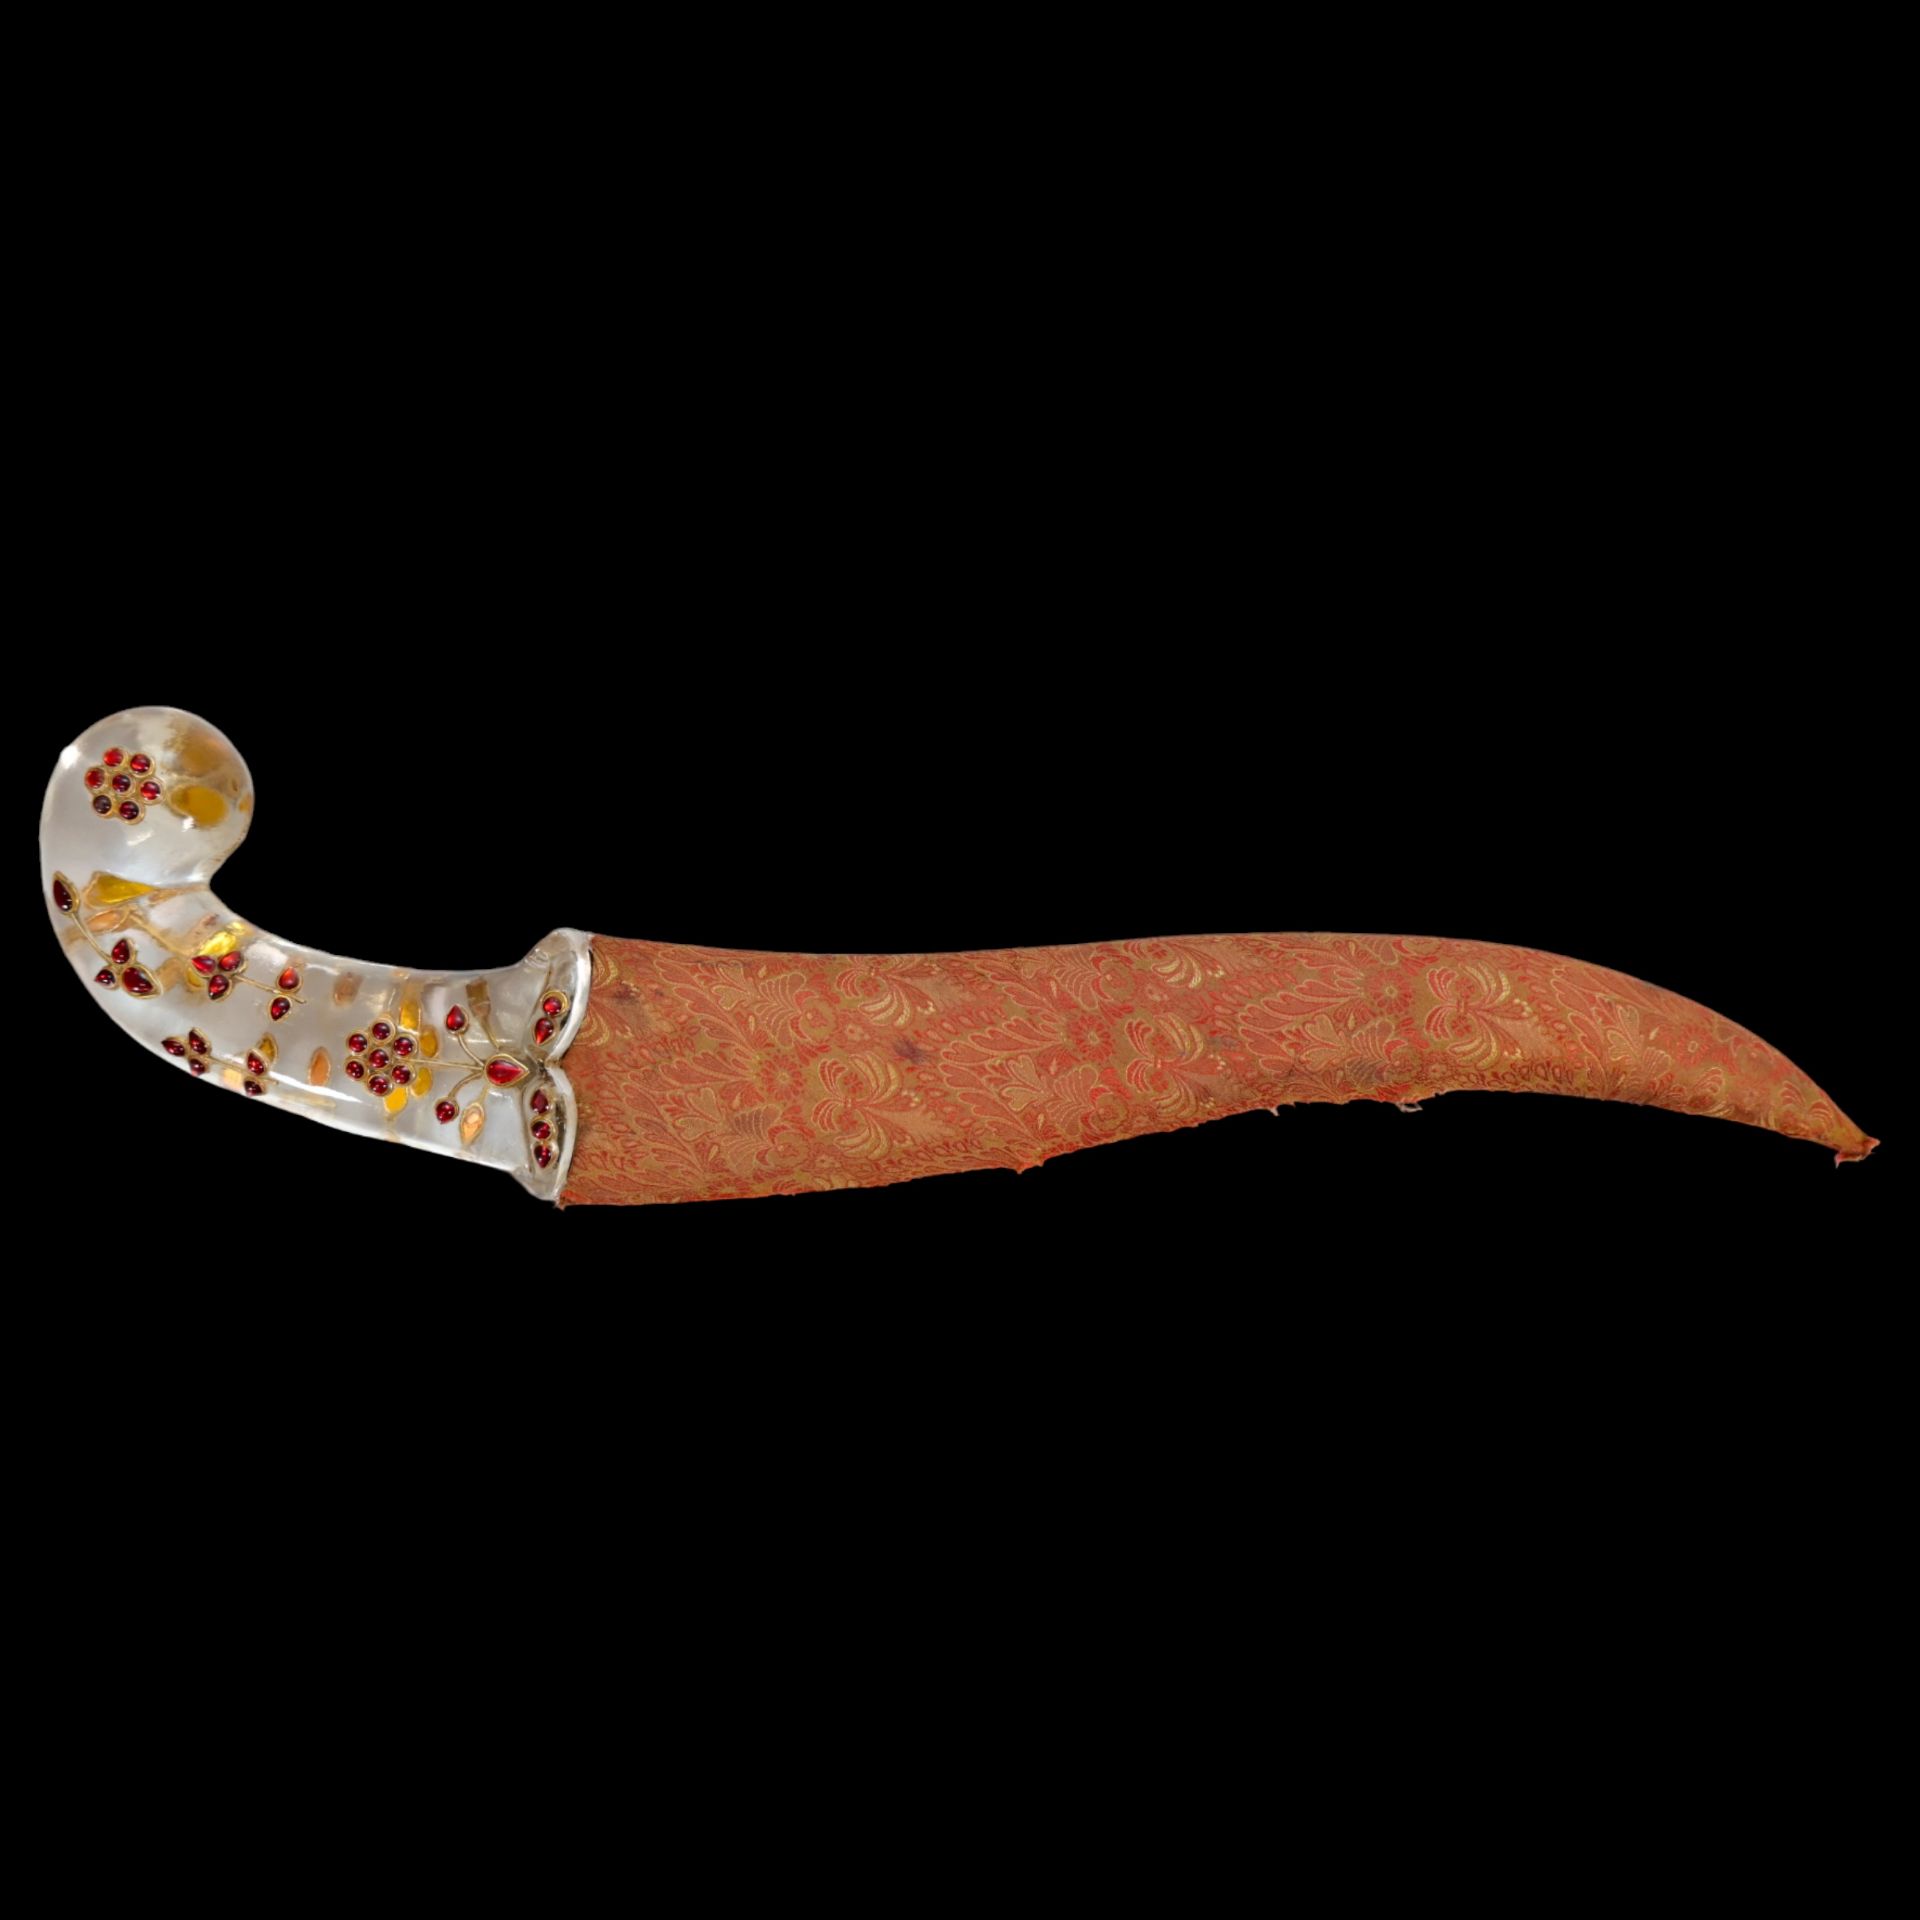 A Rare Mughal gem-set rock crystal hilted dagger with scabbard, India, 18th century. - Image 2 of 13